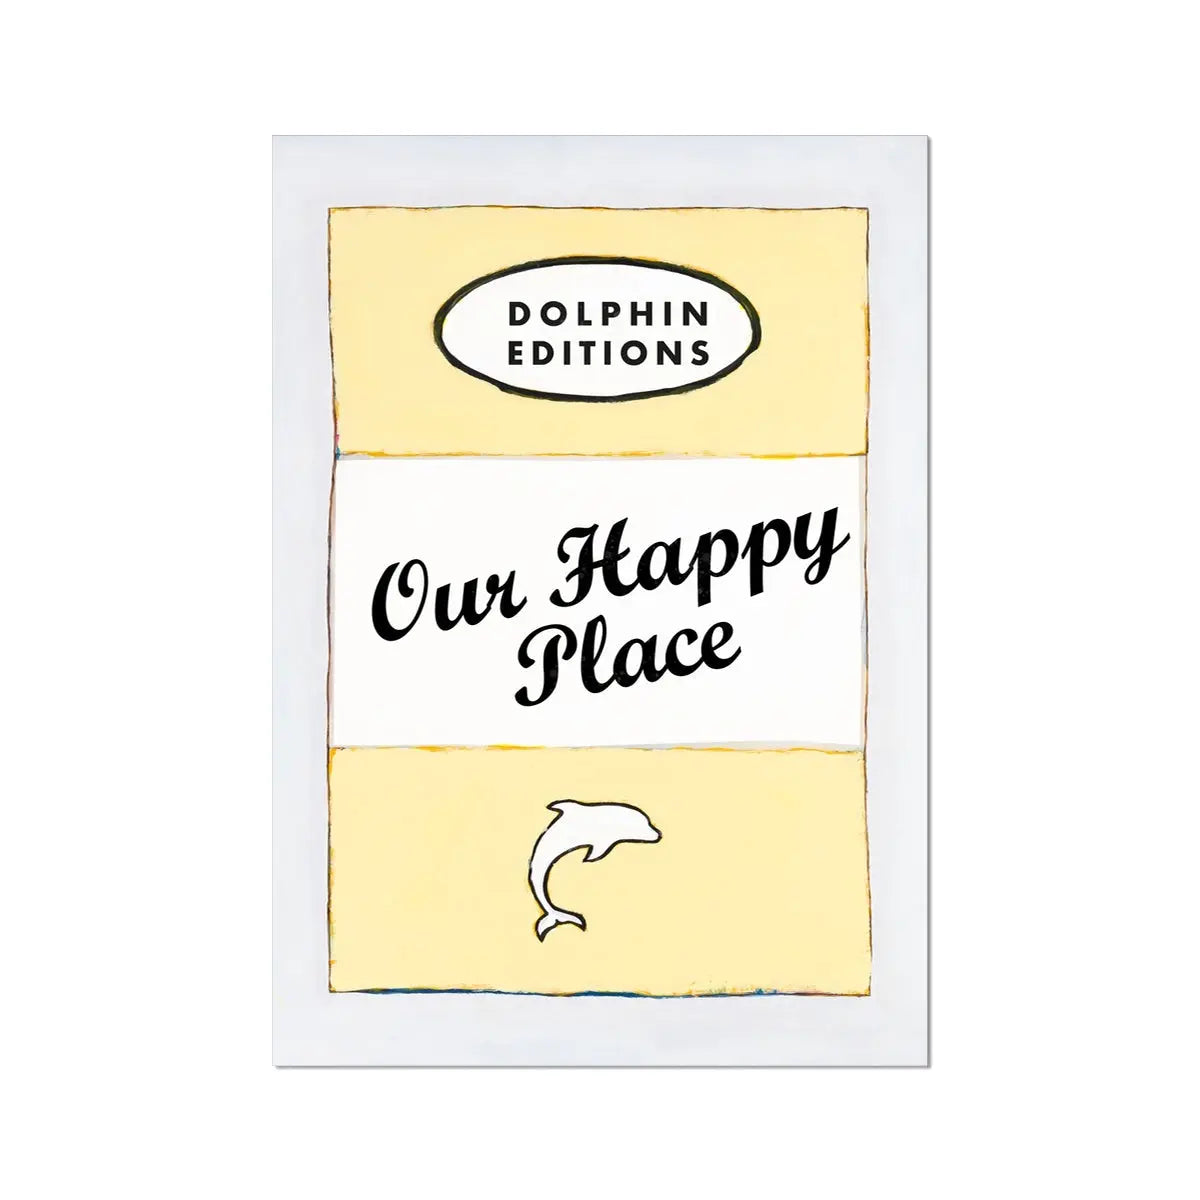 Our Happy Place (Yellow) Vintage Book Cover Art Print - Unframed